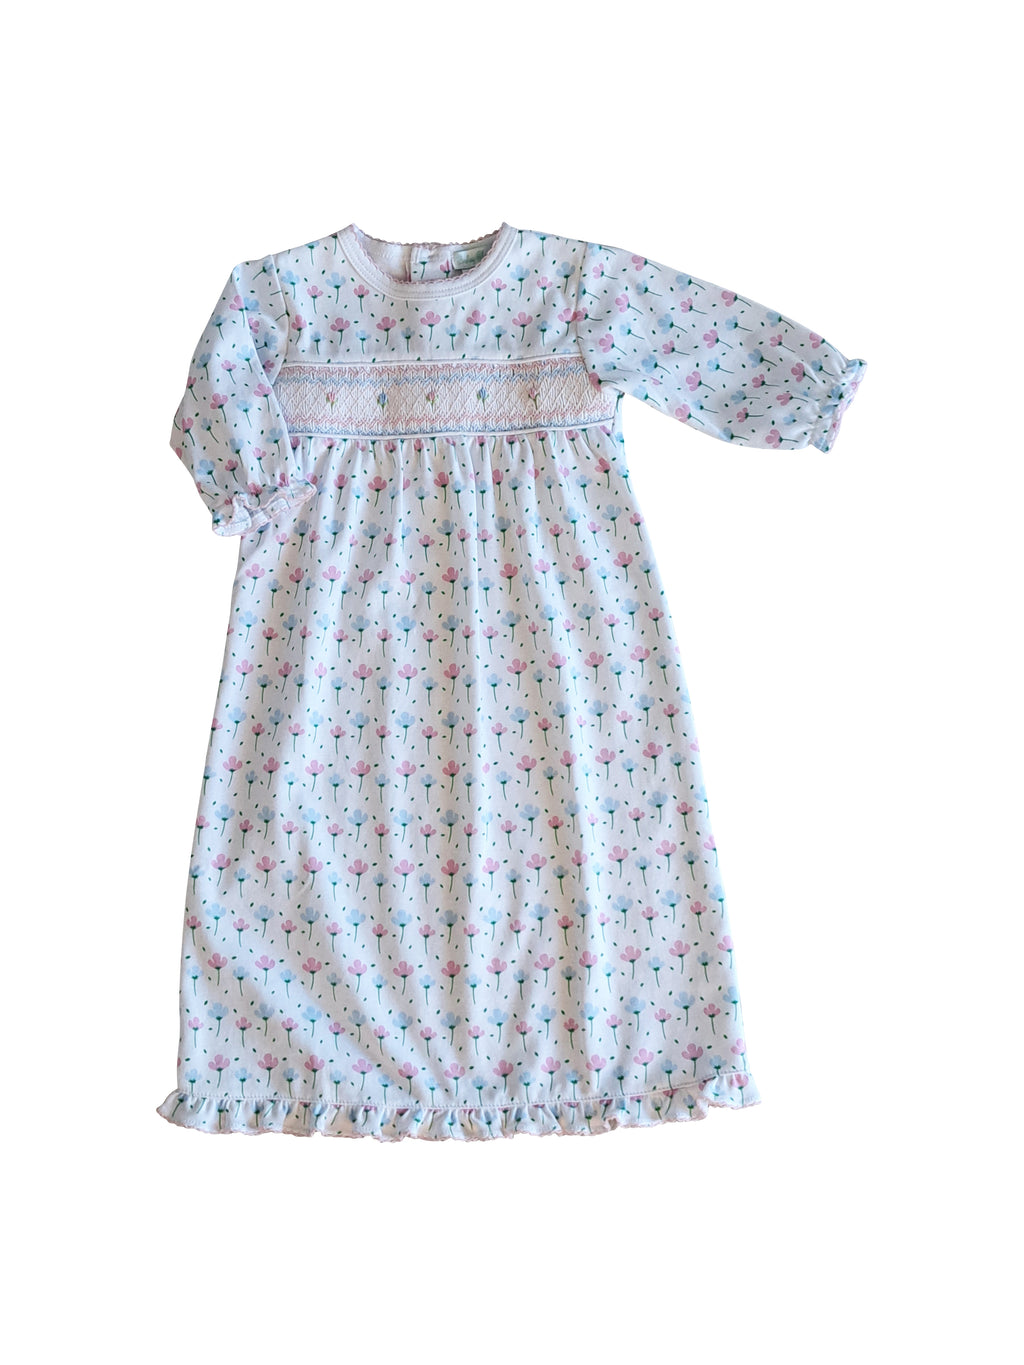 Hand smocked Spring flowers daygown Pima Cotton - Little Threads Inc. Children's Clothing